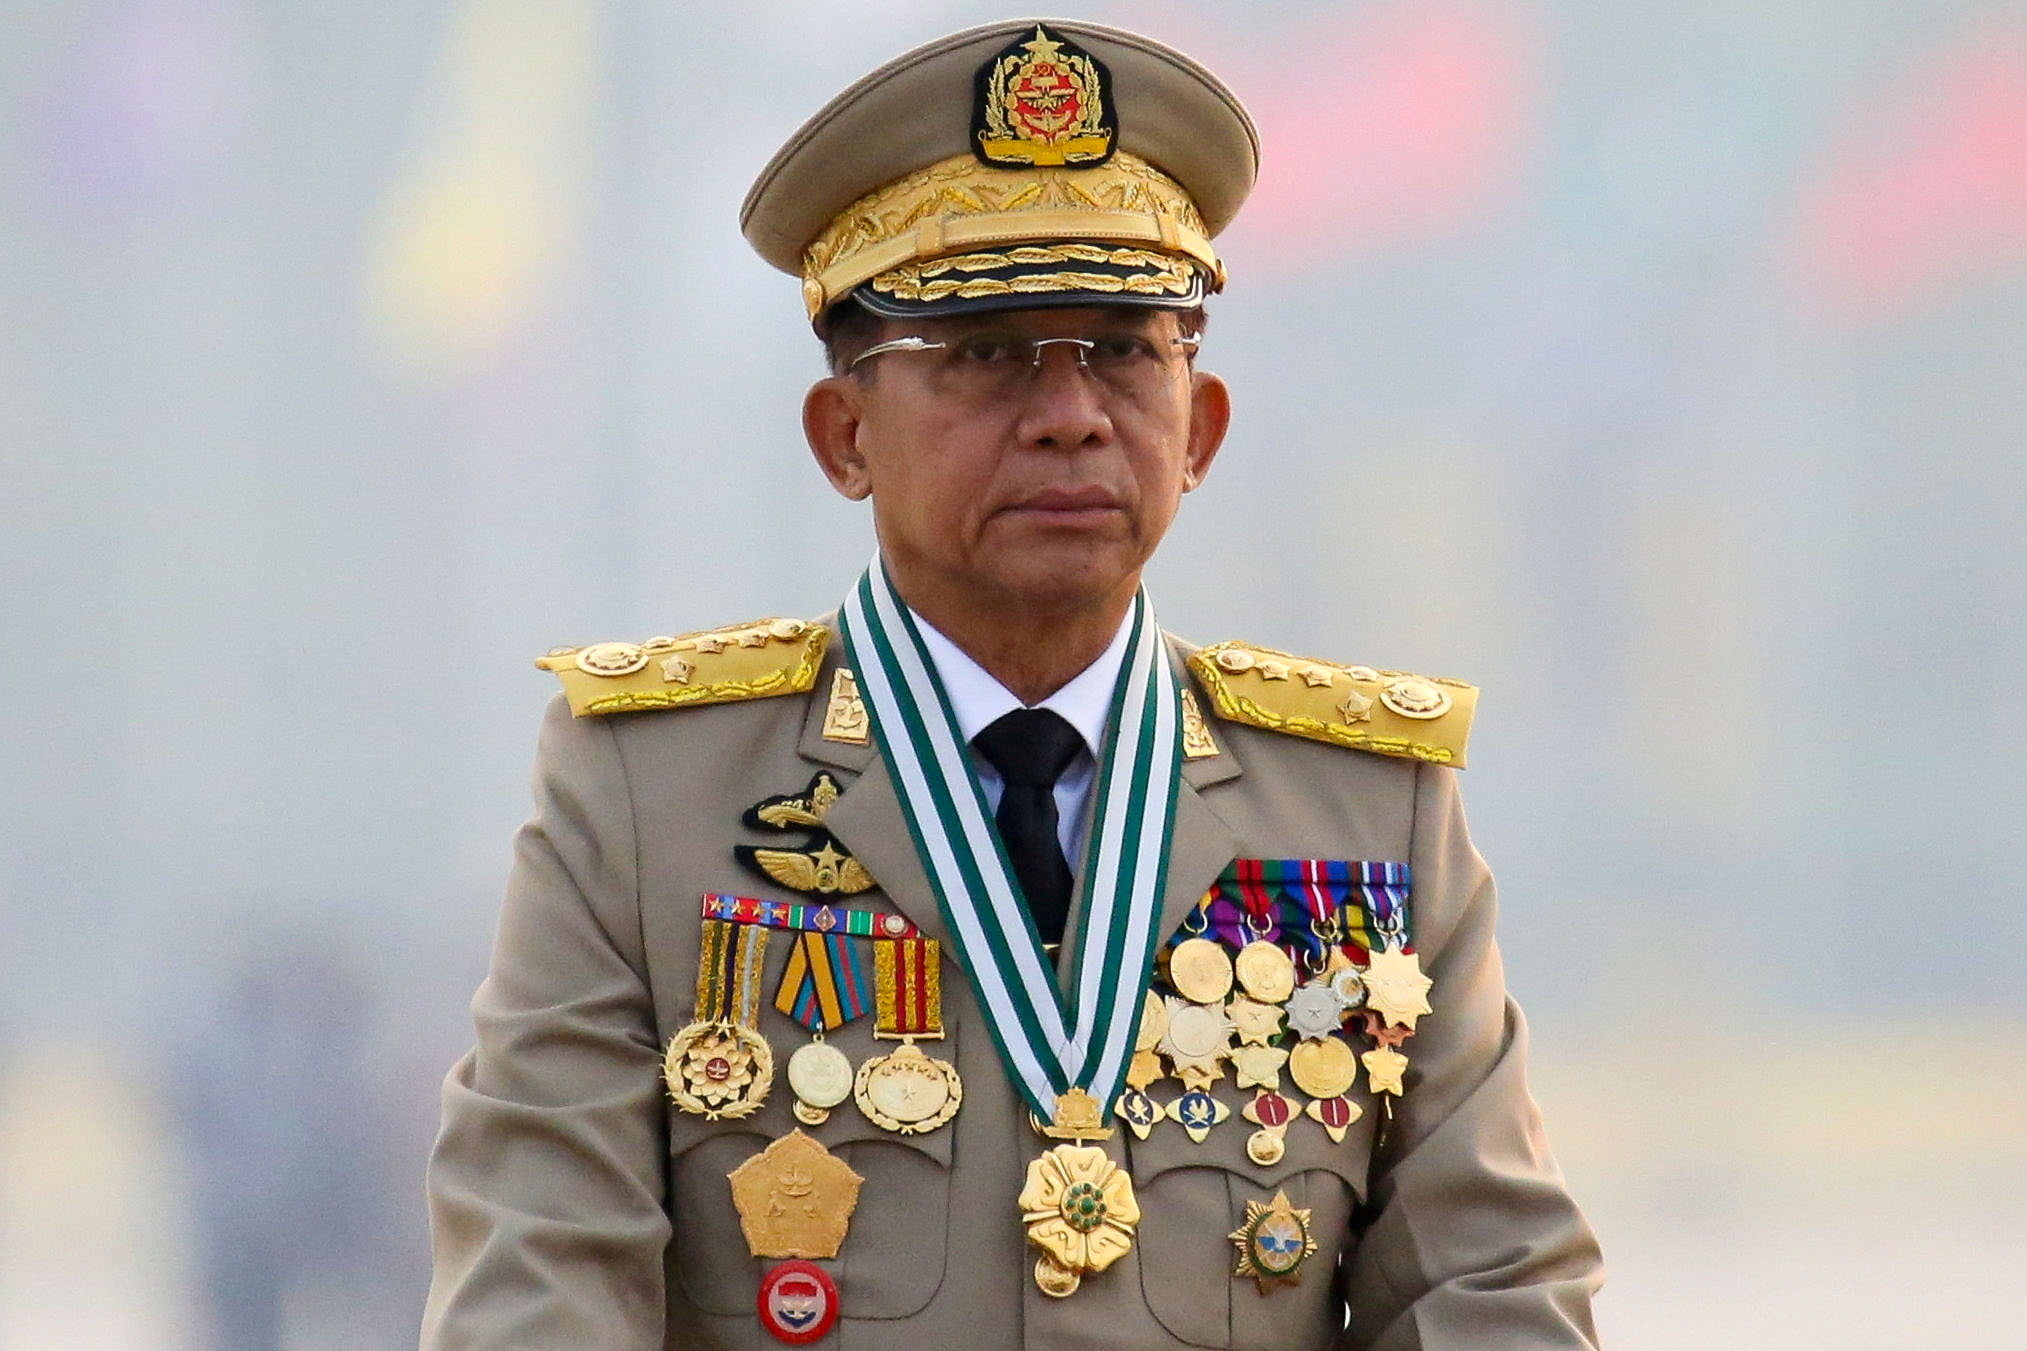 Myanmar's junta chief Senior General Min Aung Hlaing, who ousted the elected government in a coup on February 1, presides an army parade on Armed Forces Day in Naypyitaw, Myanmar, March 27, 2021. REUTERS/Stringer/File Photo